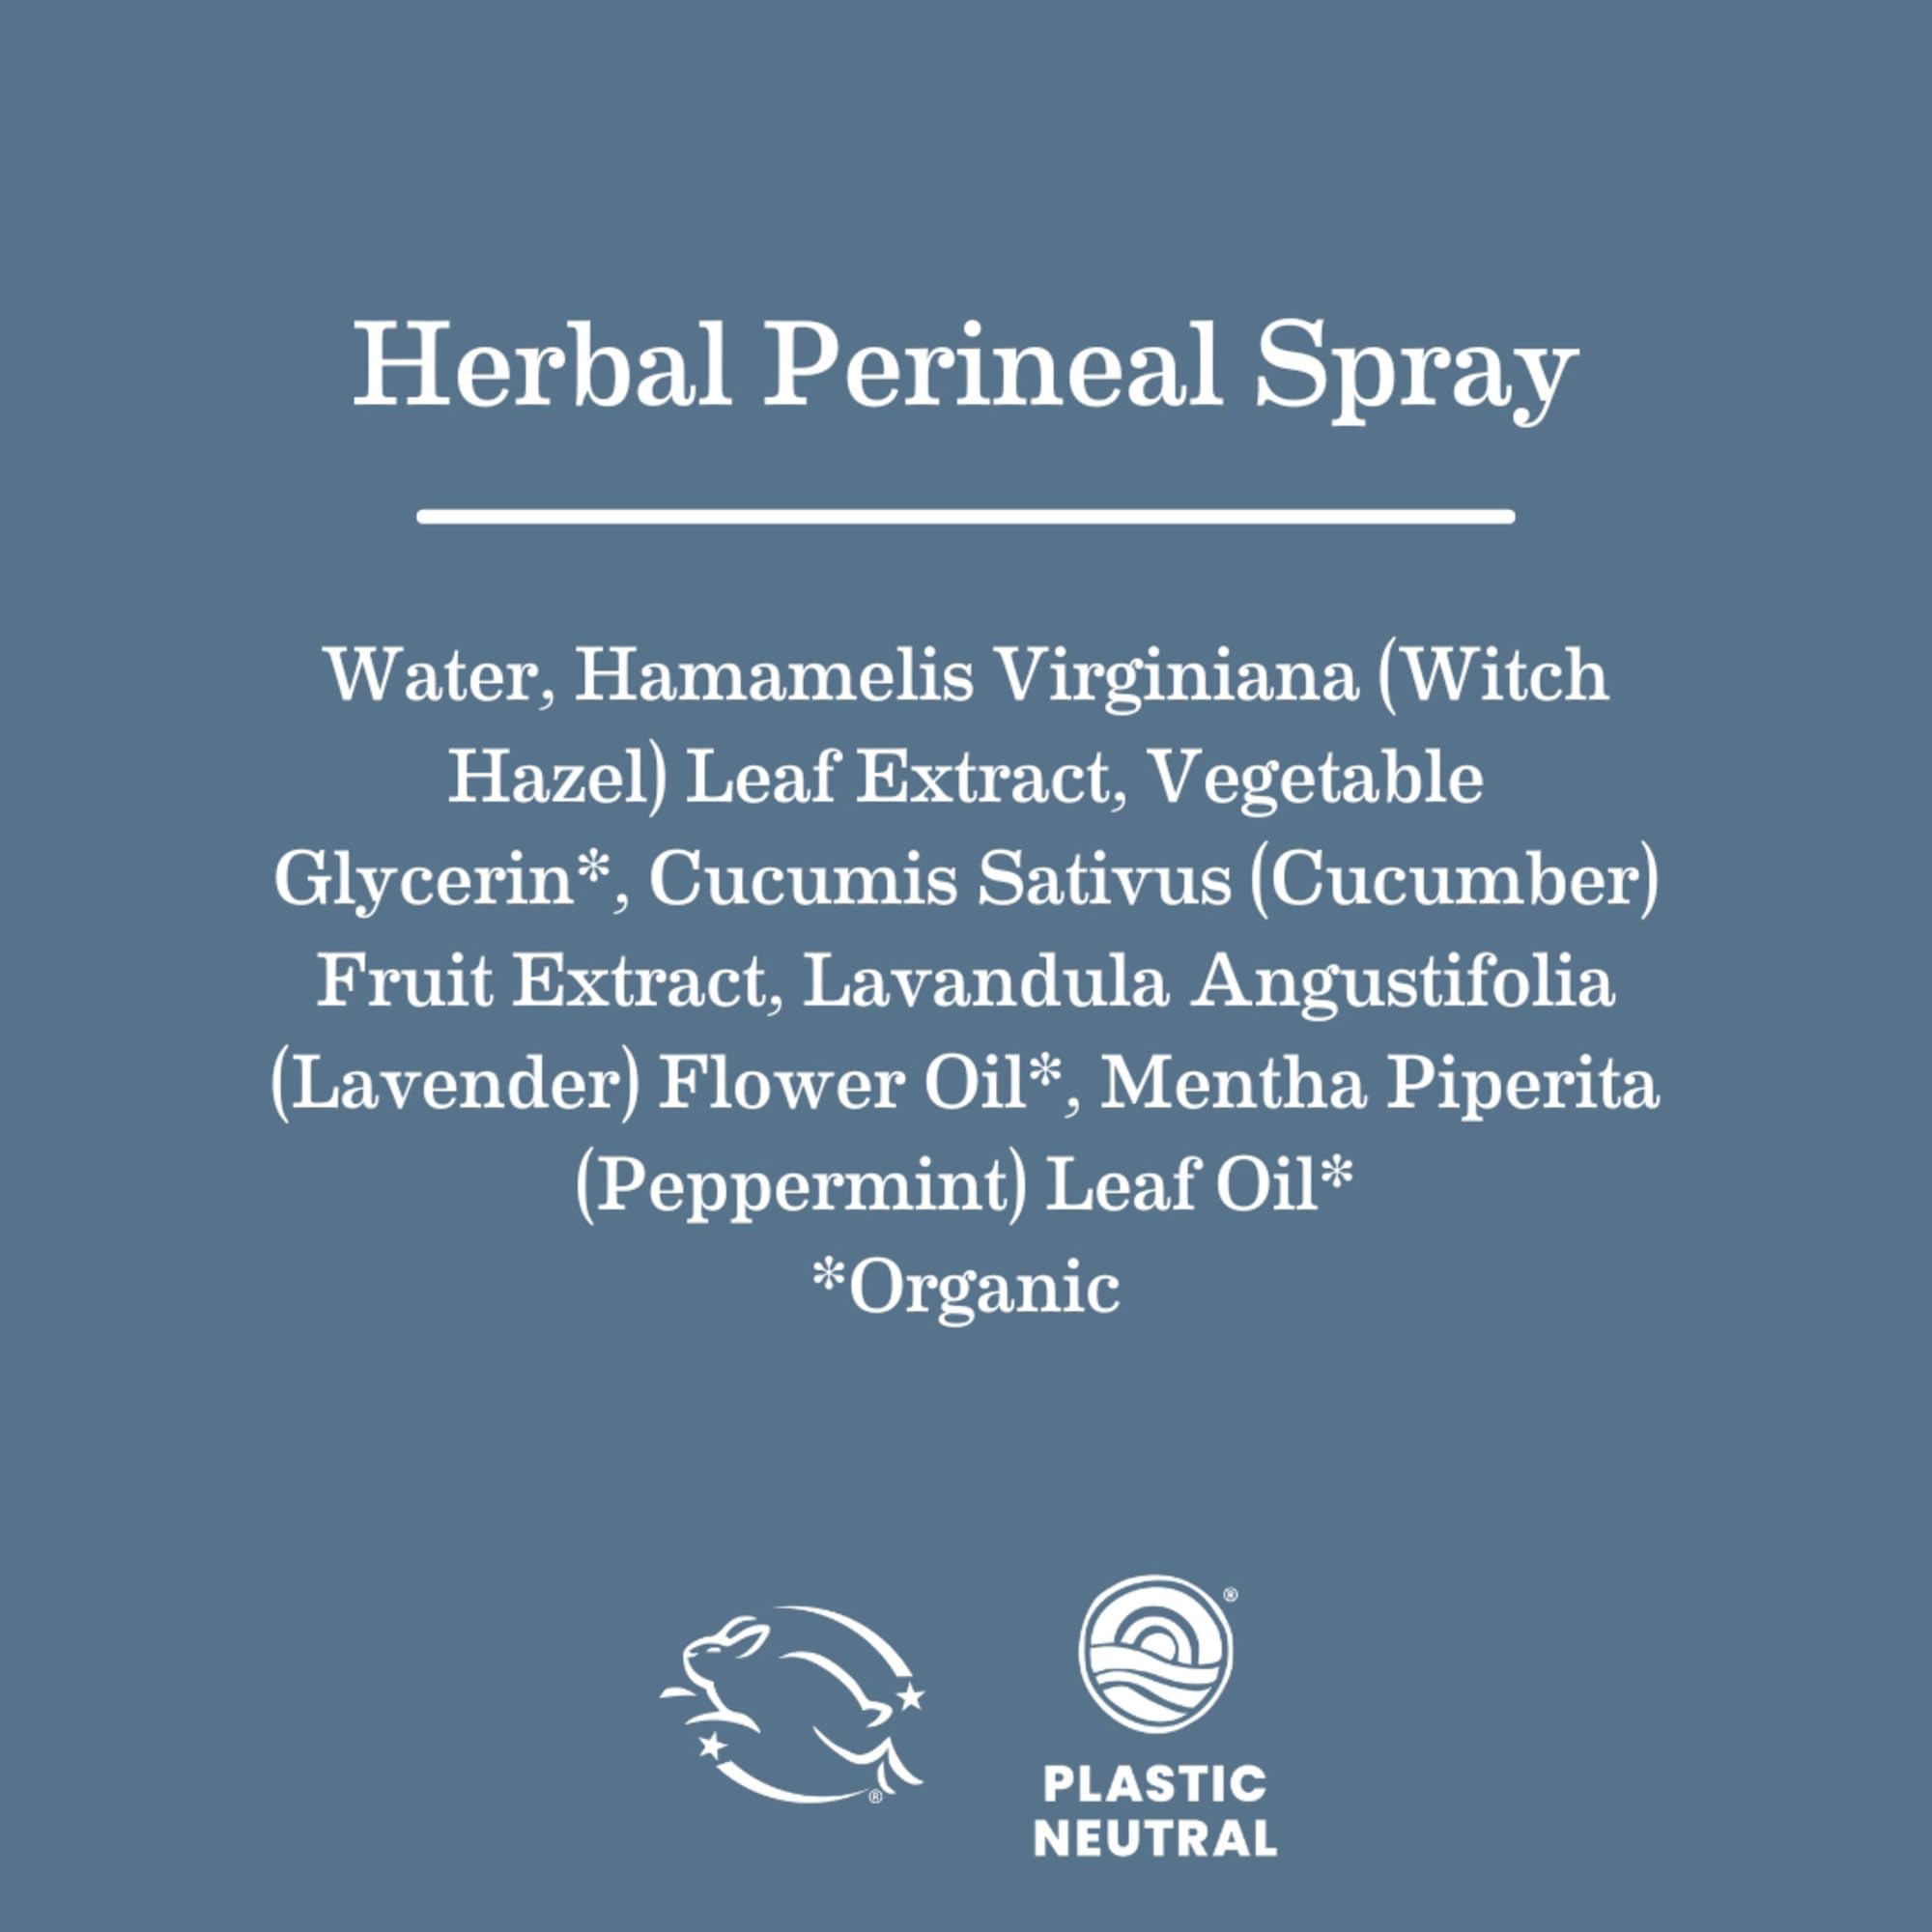 Earth Mama Herbal Perineal Spray | Safe for Pregnancy and Postpartum Recovery, Witch Hazel Natural Cooling Spray For After Birth Feminine Care Essentials, Benzocaine & Butane Free, 4-Fluid Ounce